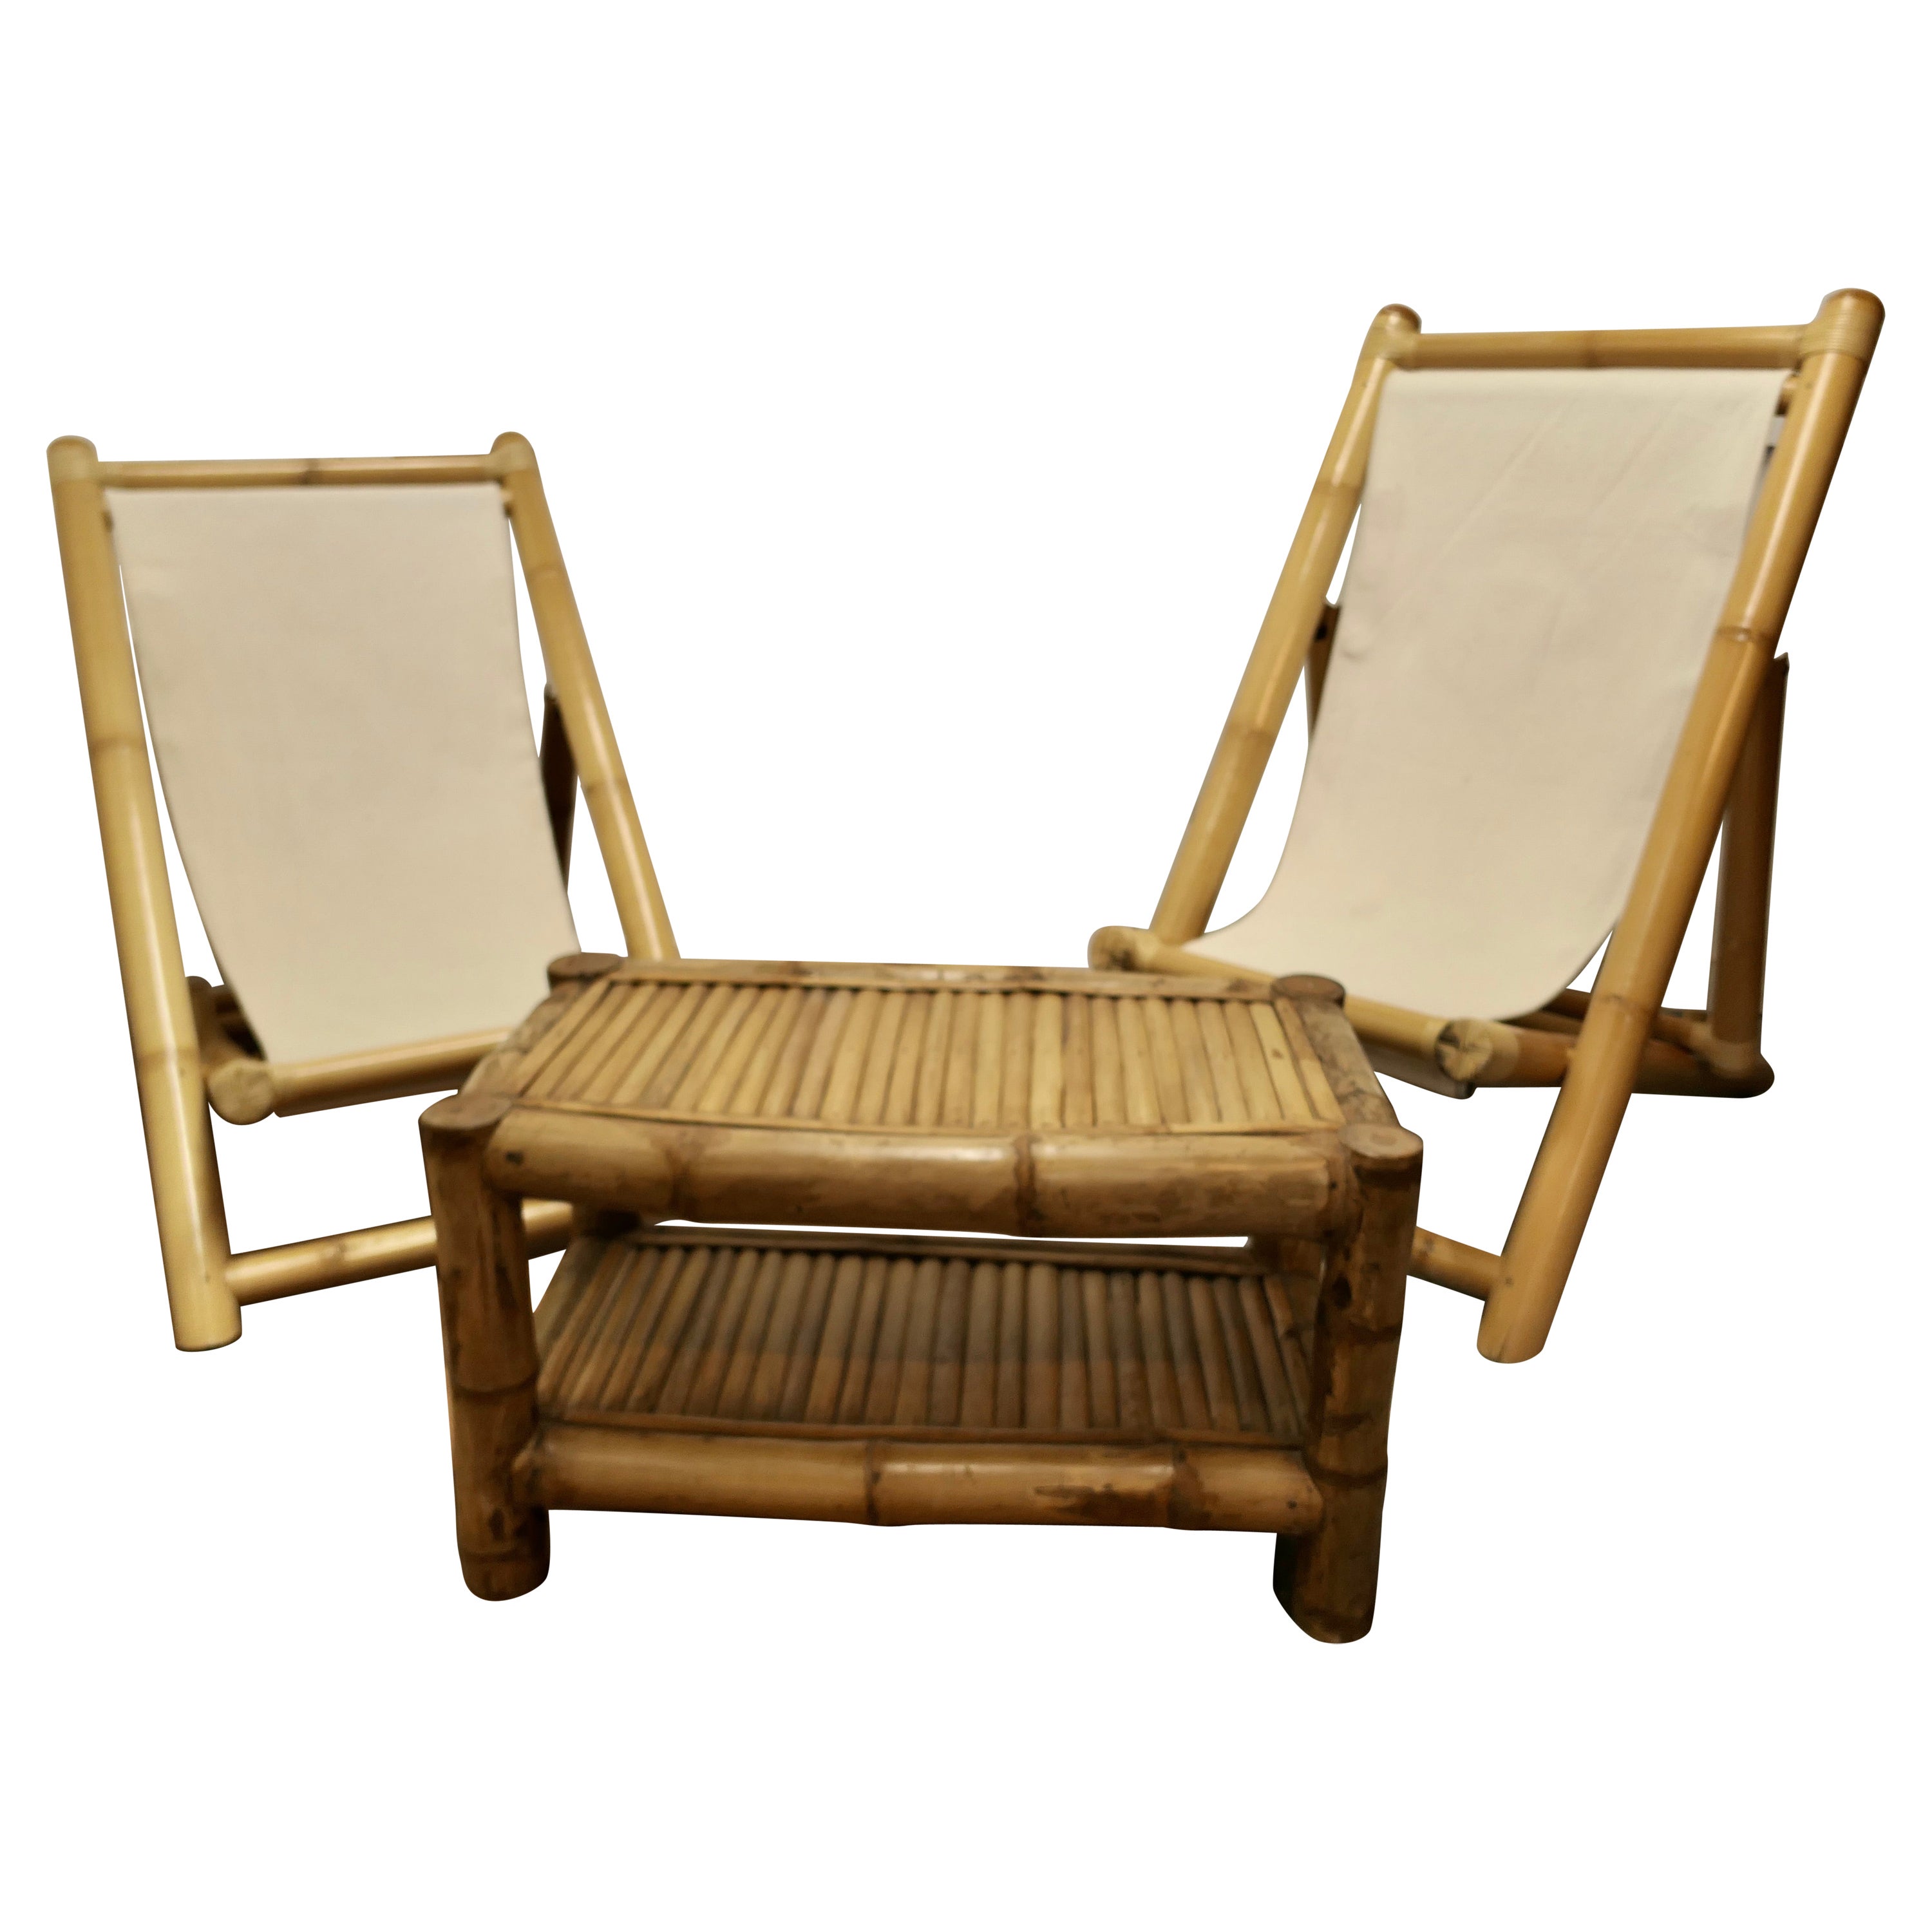 Pair of Giant Bamboo Deck Chair Set with Coffee Table For Sale